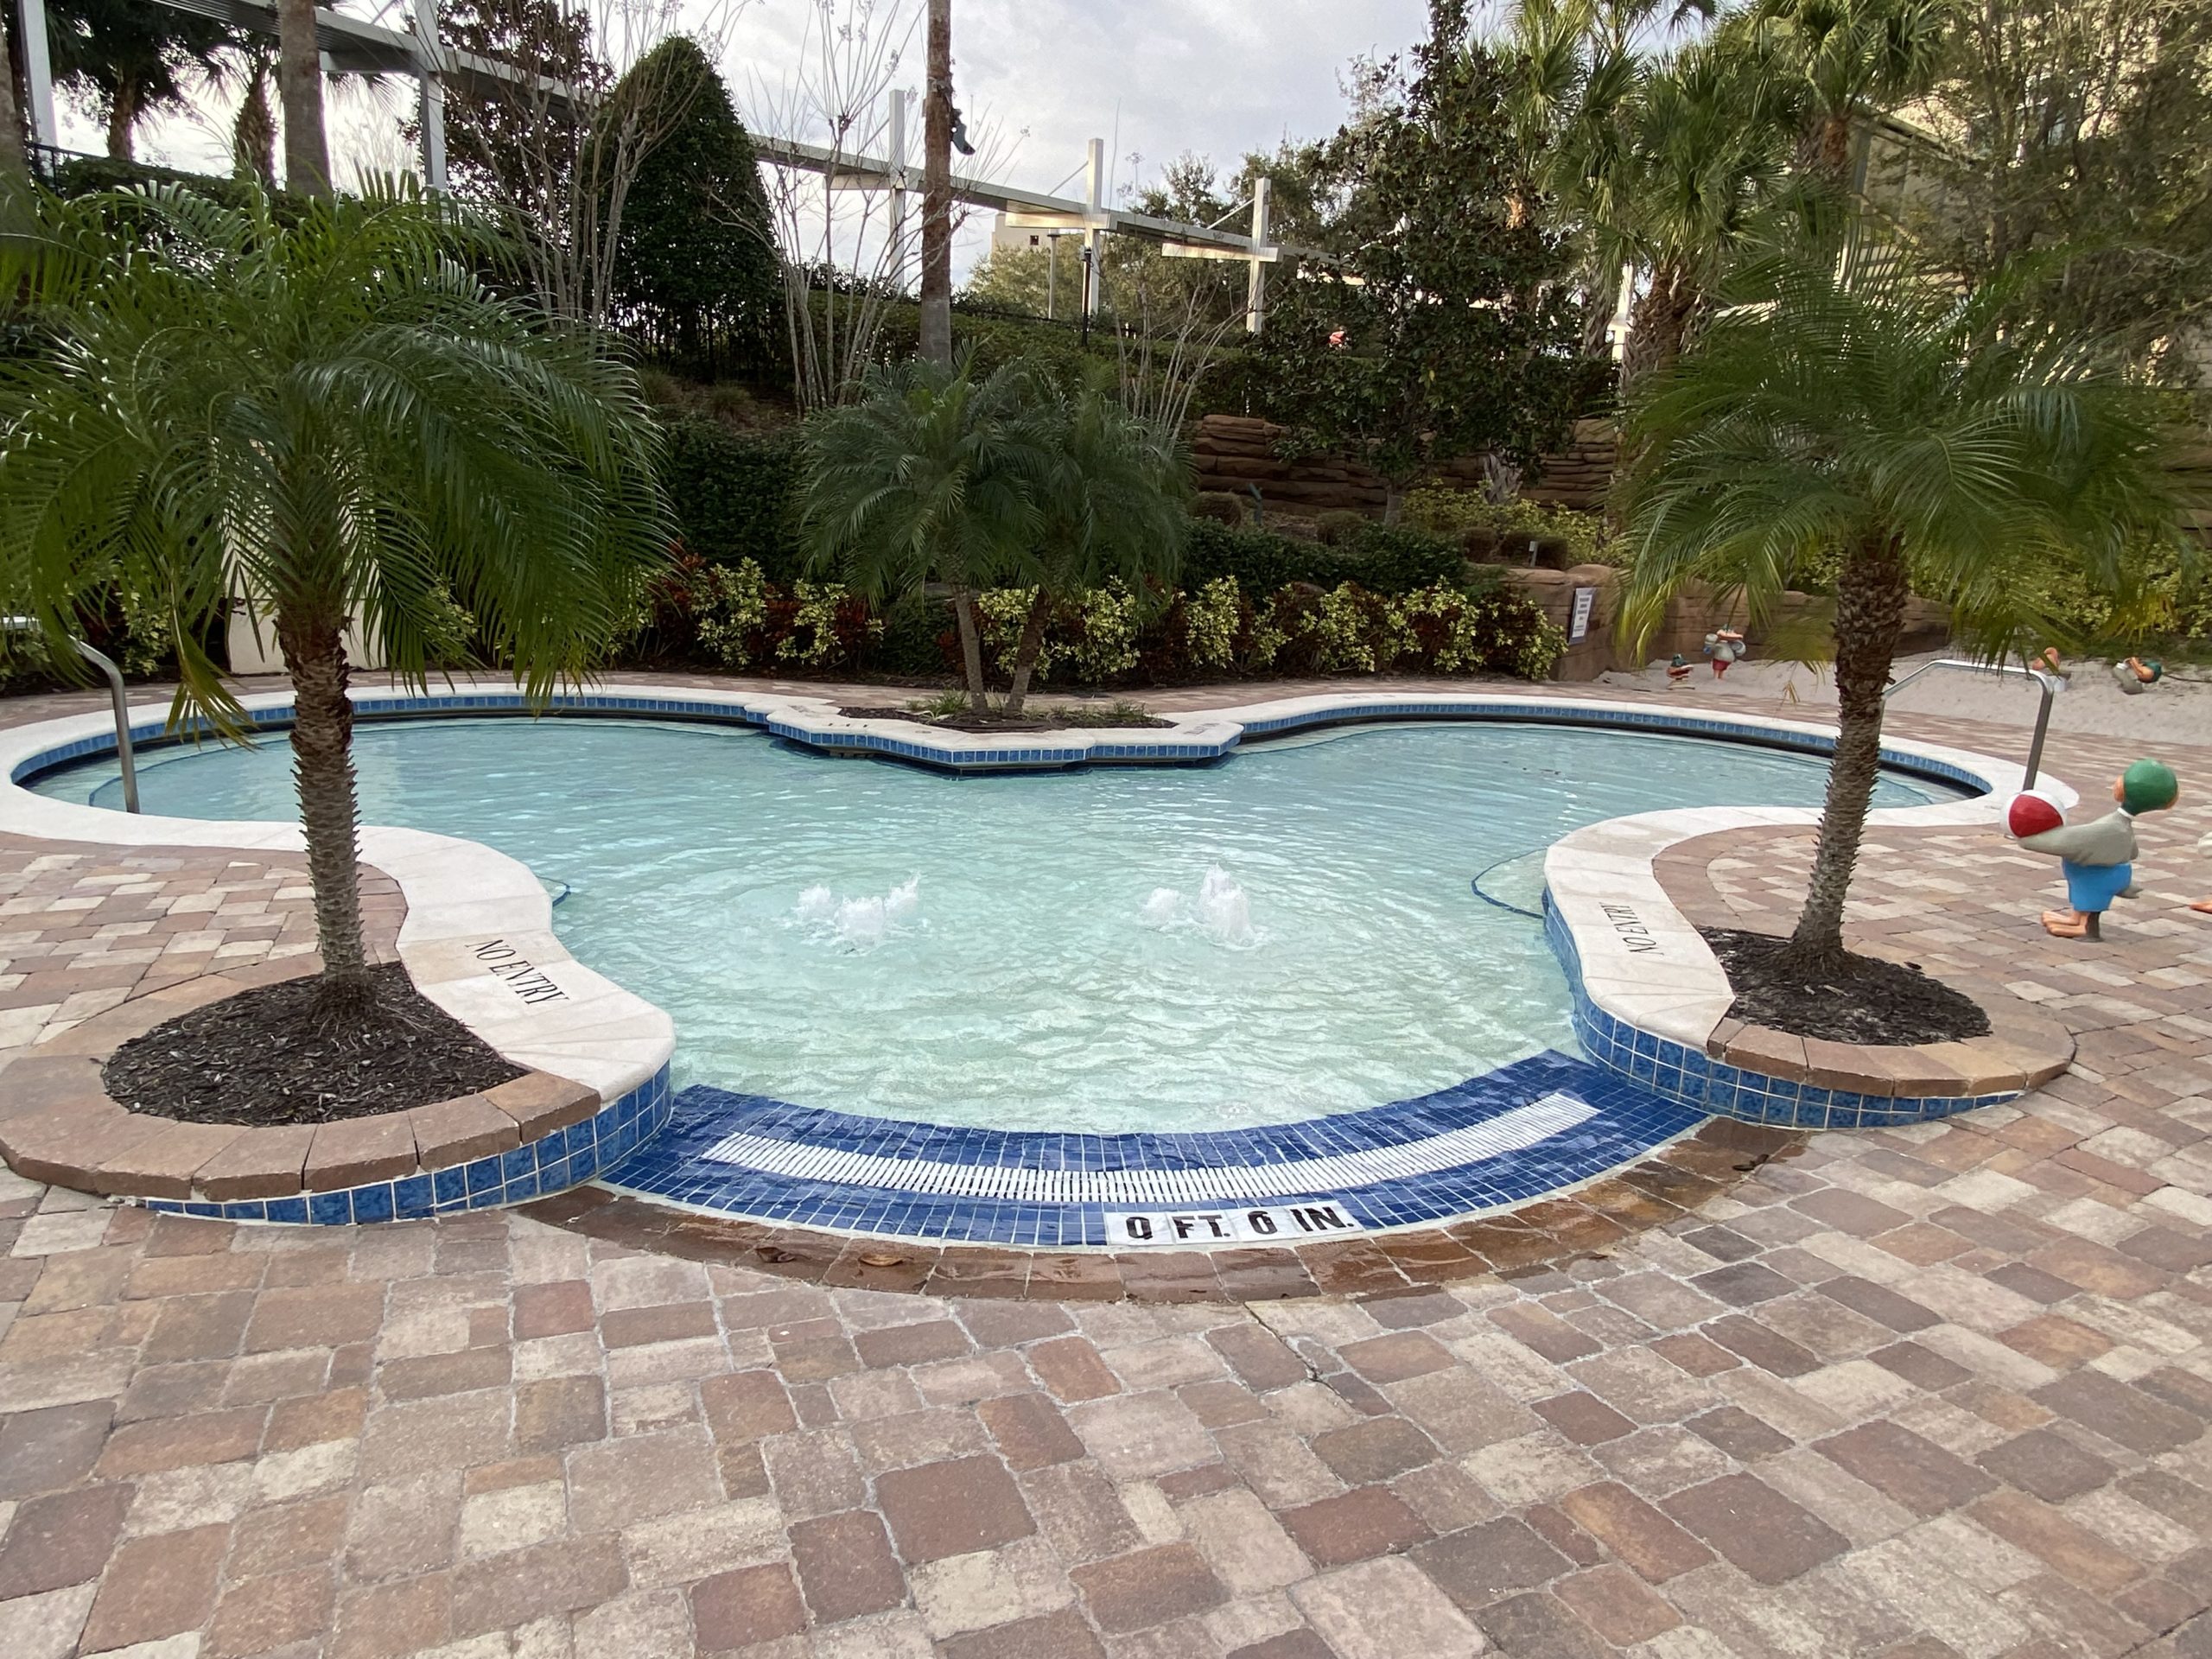 a pool with palm trees and a stone walkway